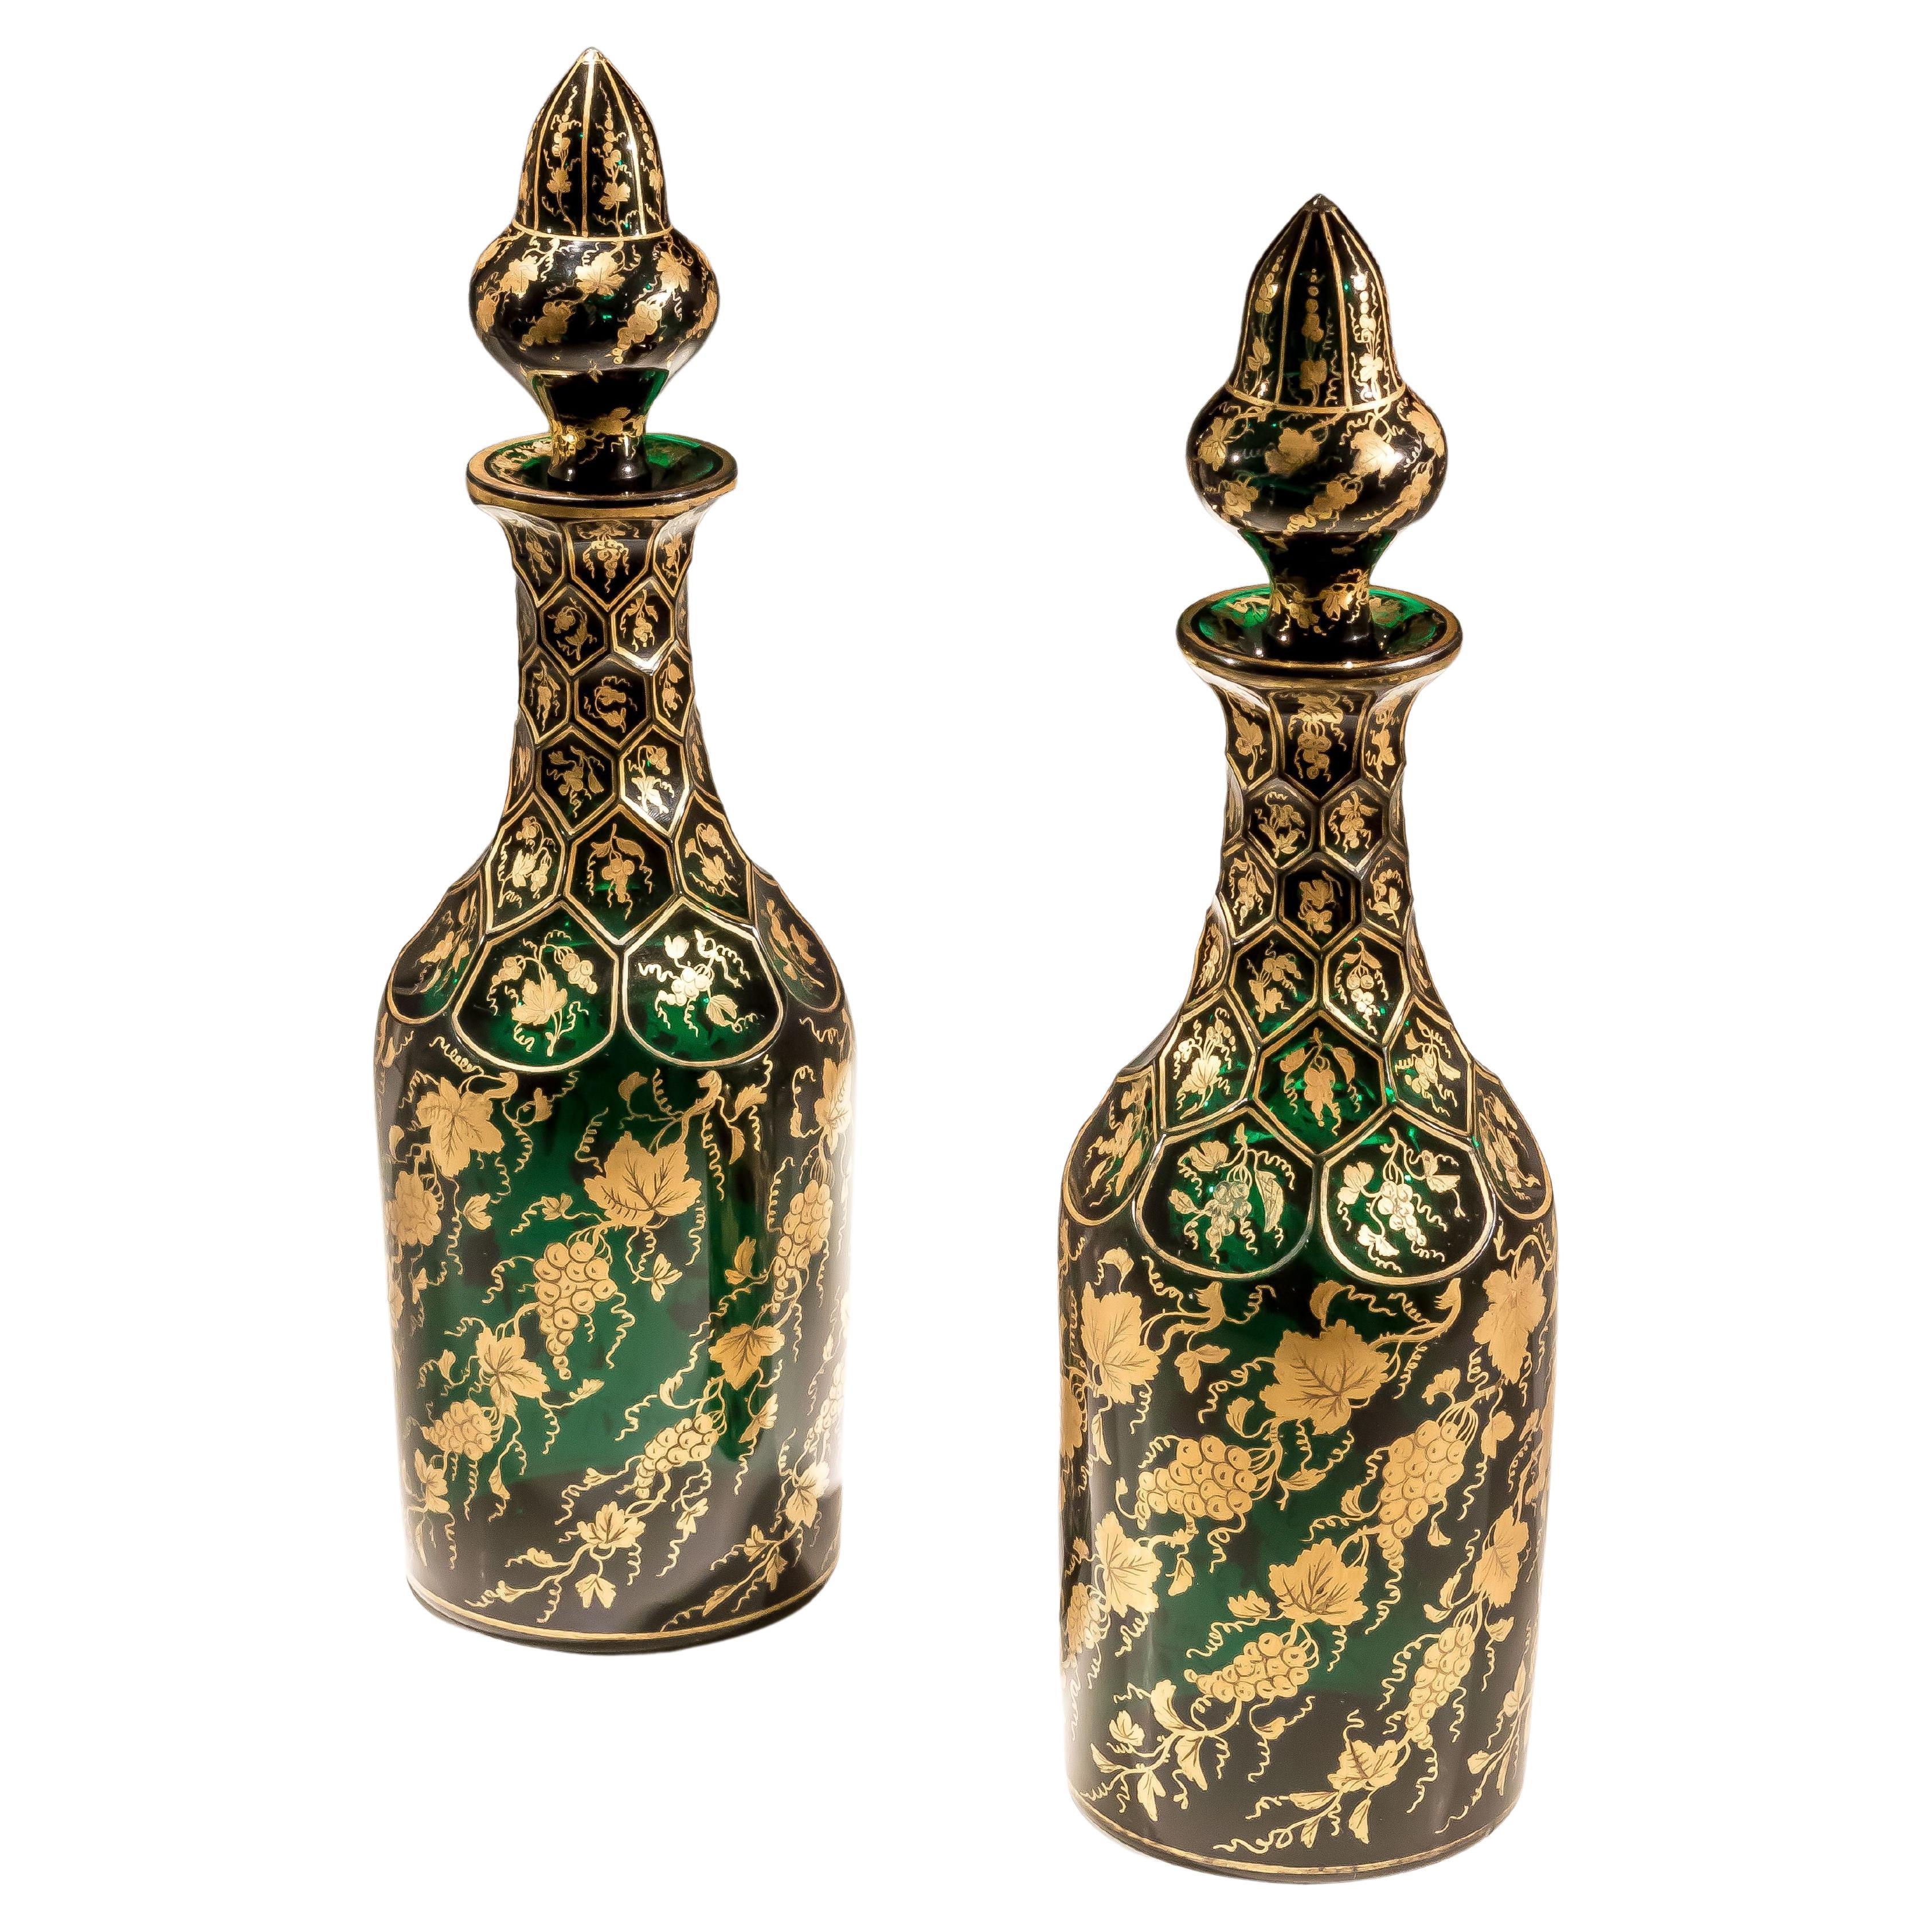 Exceptional Pair of Green Decanters